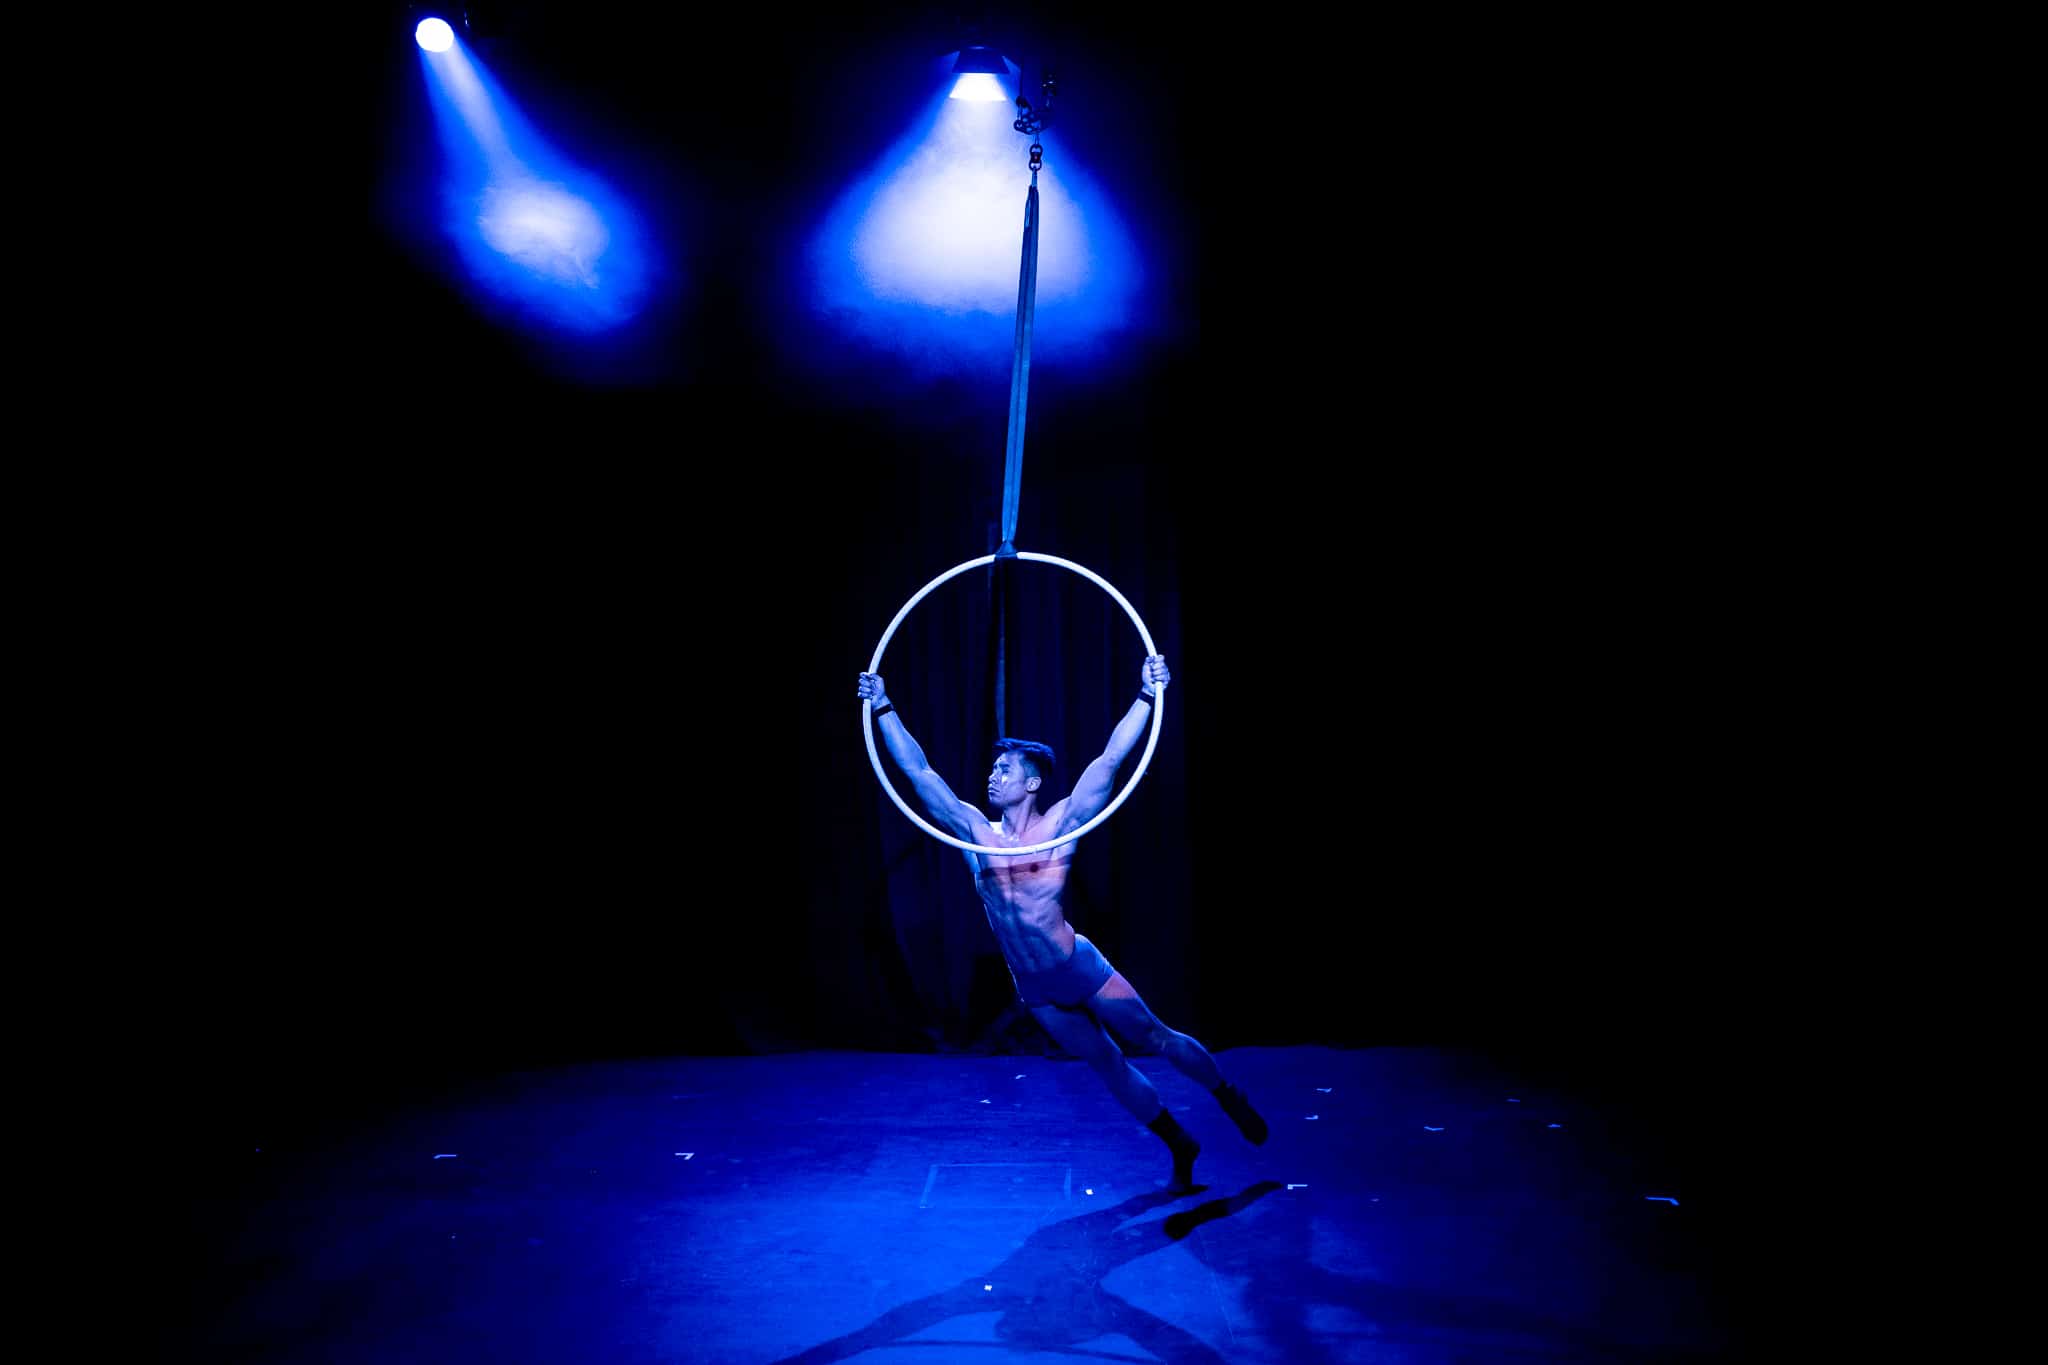 Zaki performing Divinations 1.0 at Jacksons Lane Hangwire Scratch Night (2023). He swings from a hoop with his hands held high and strong in a V shape, his feet barely touching the ground.